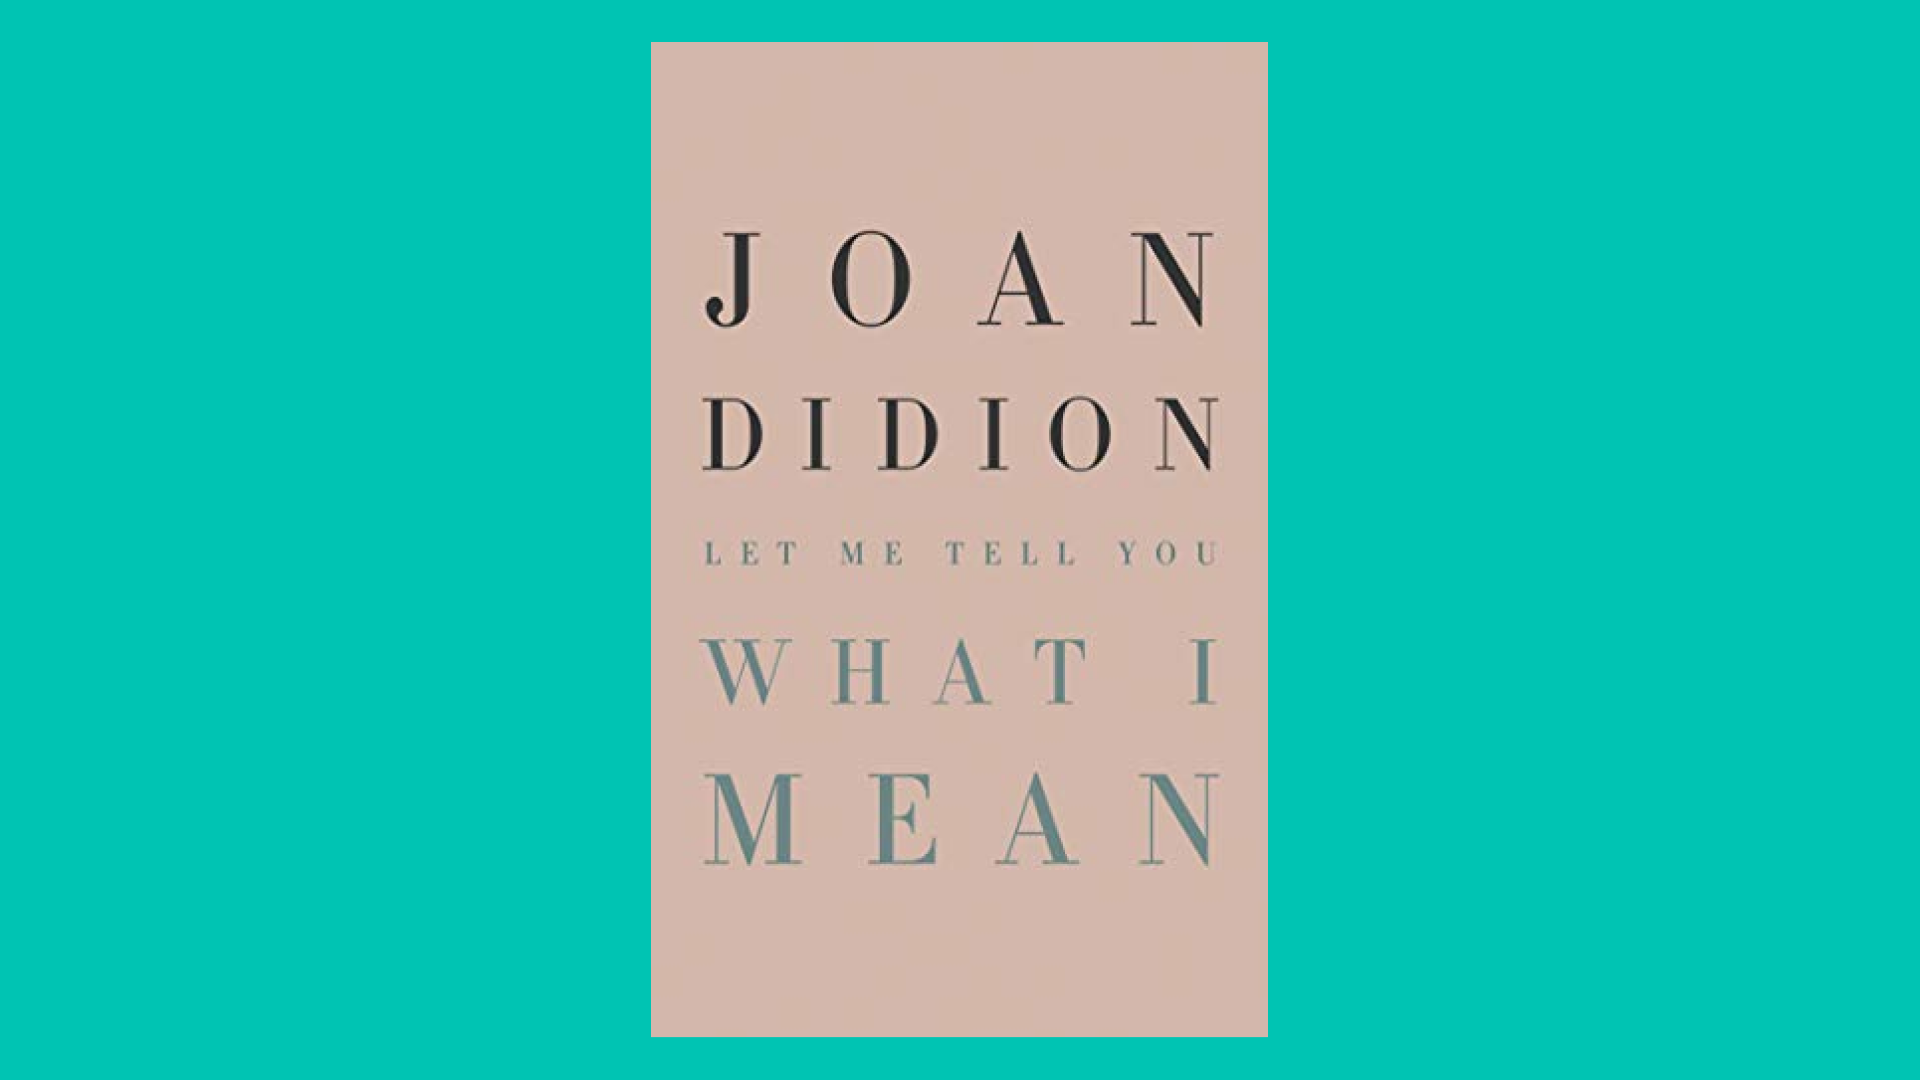 “Let Me Tell You What I Mean” by Joan Didion